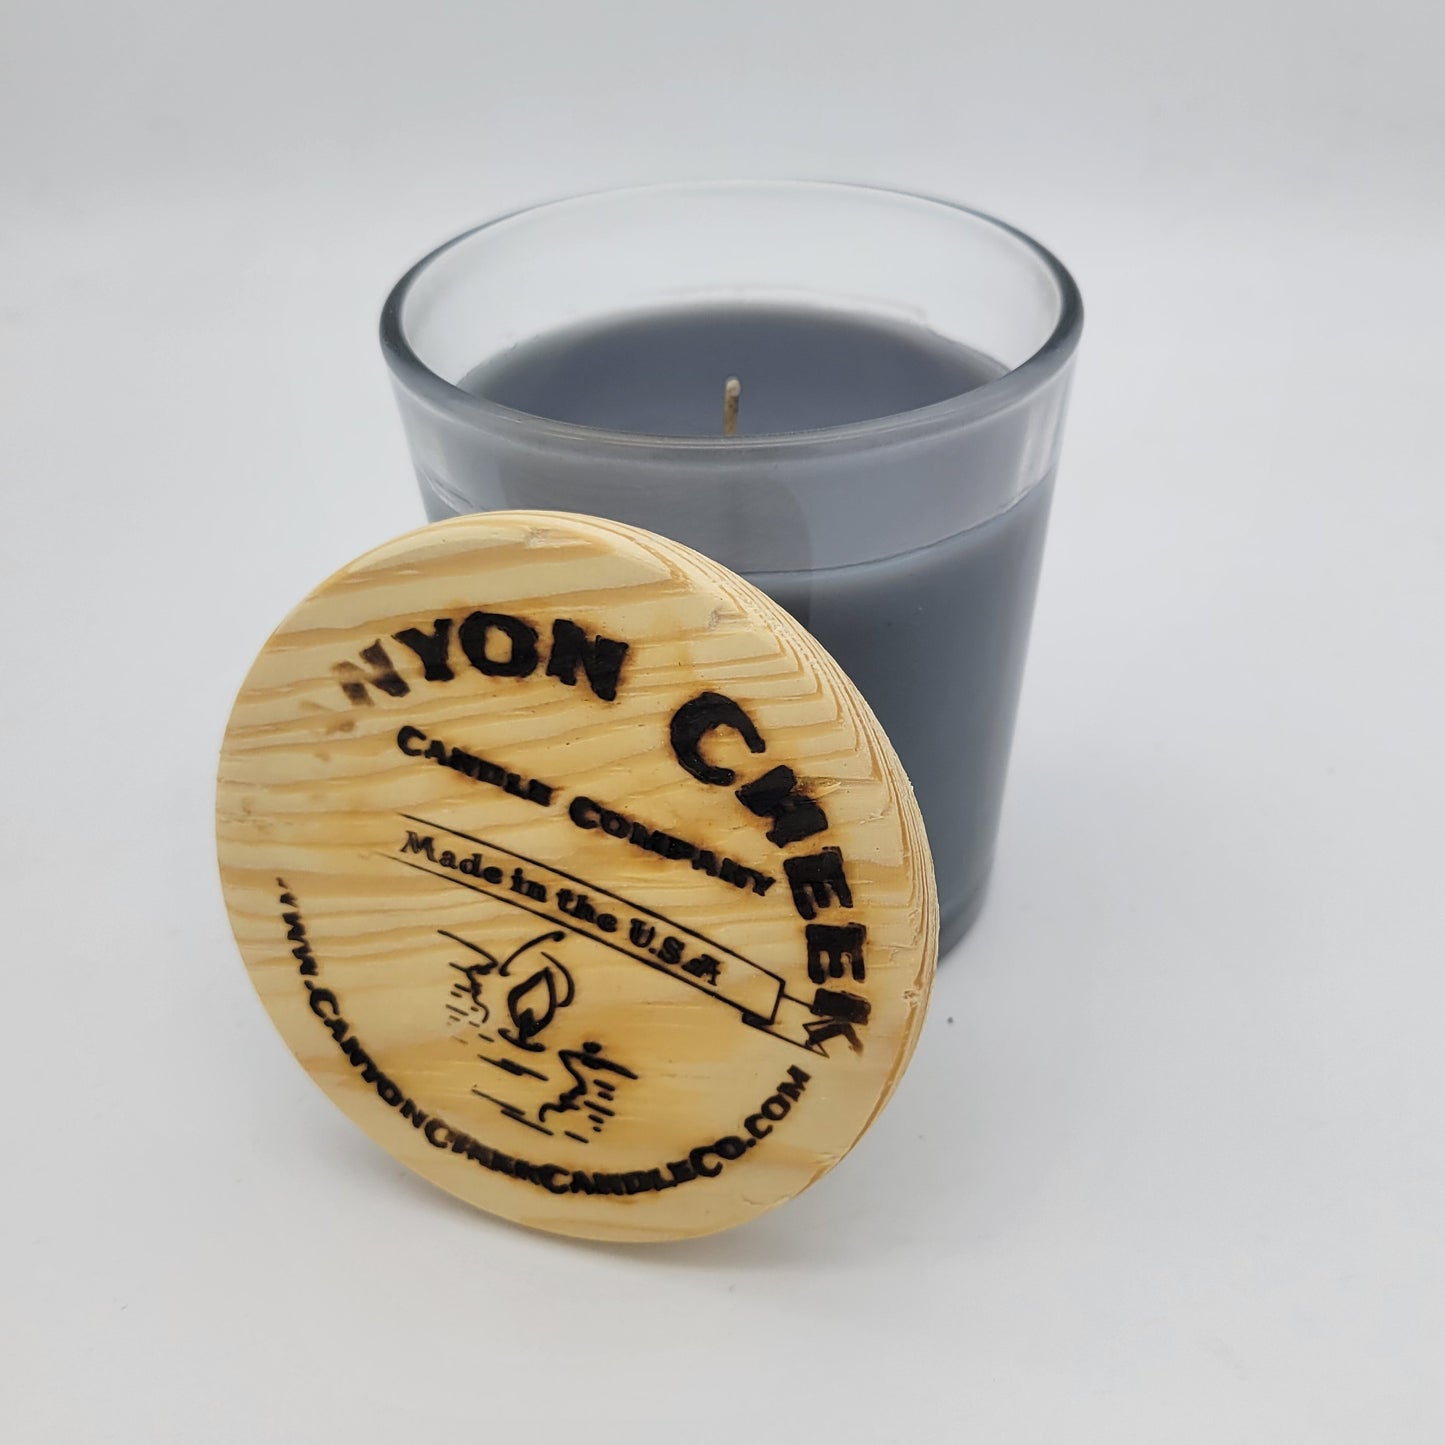 I know This Guy 8oz tumbler jar candle